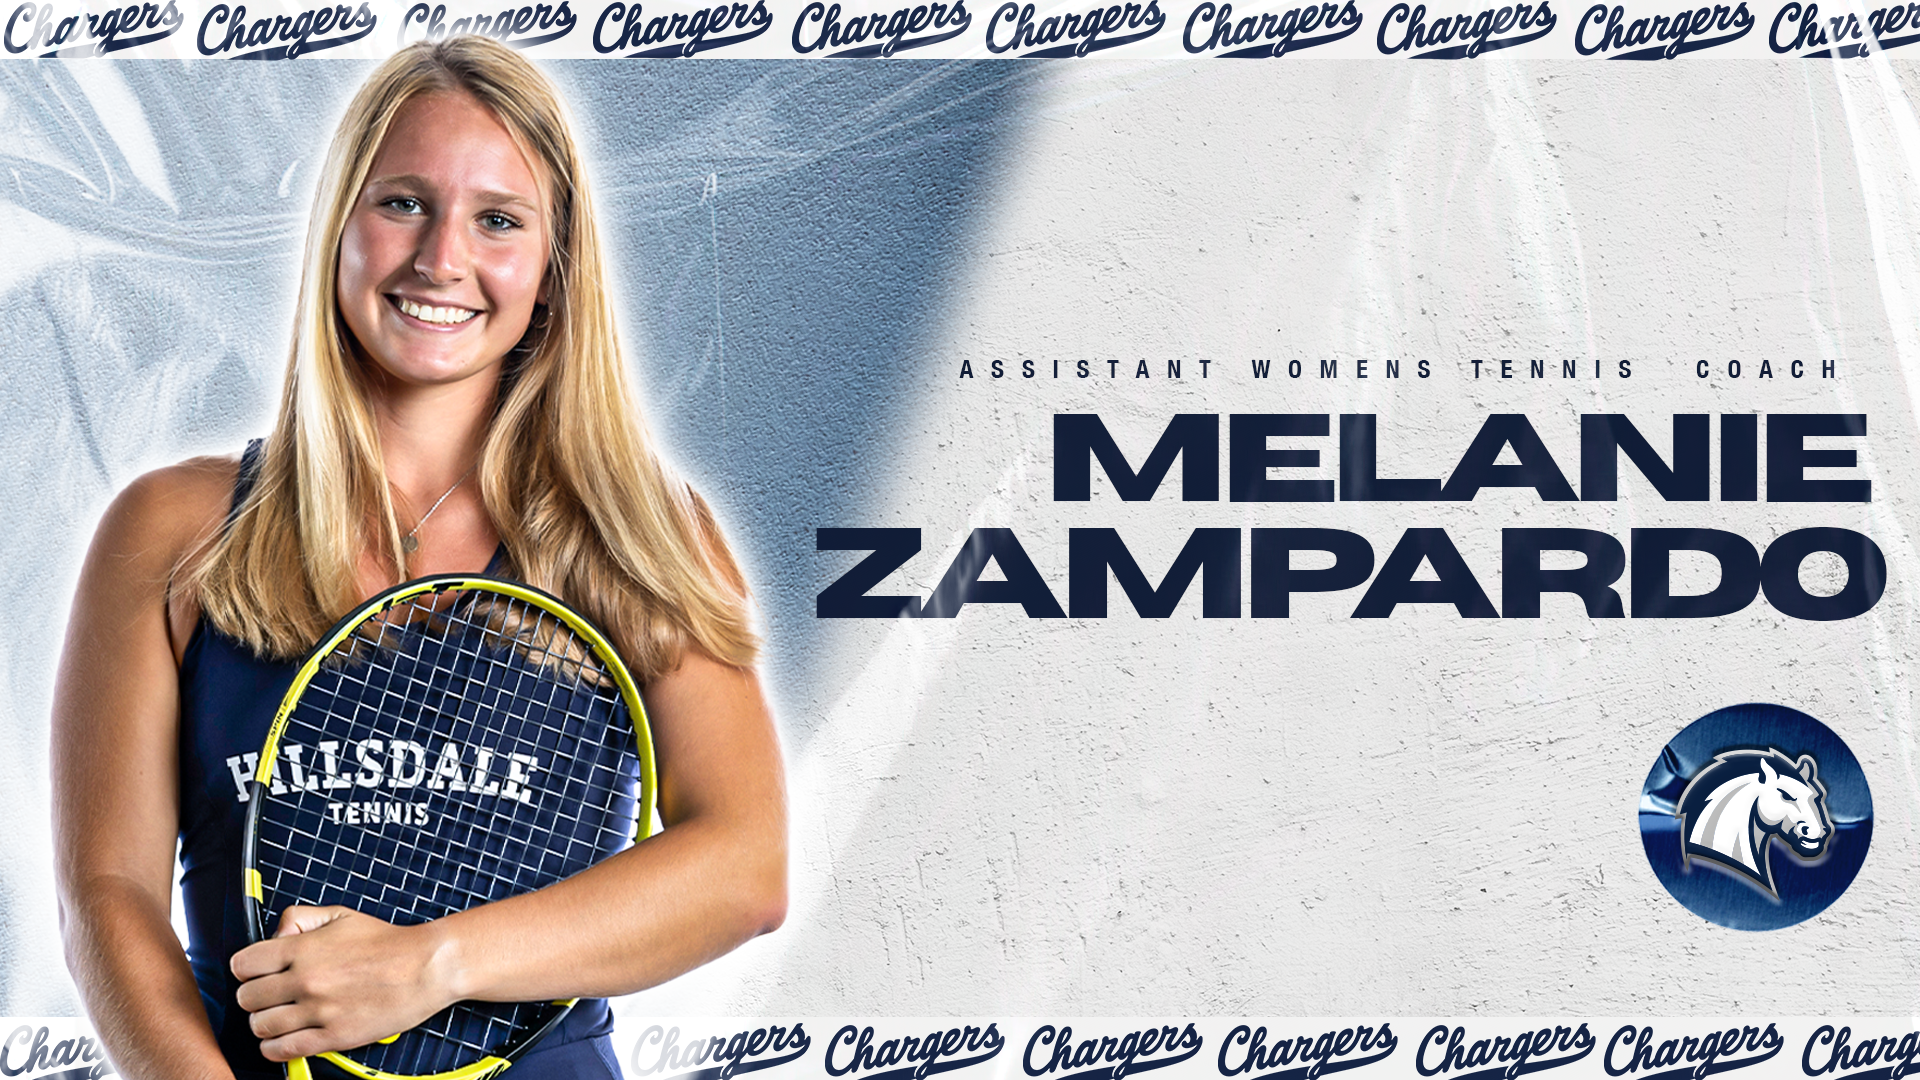 Melanie Zampardo to join Chargers women's tennis staff as assistant coach